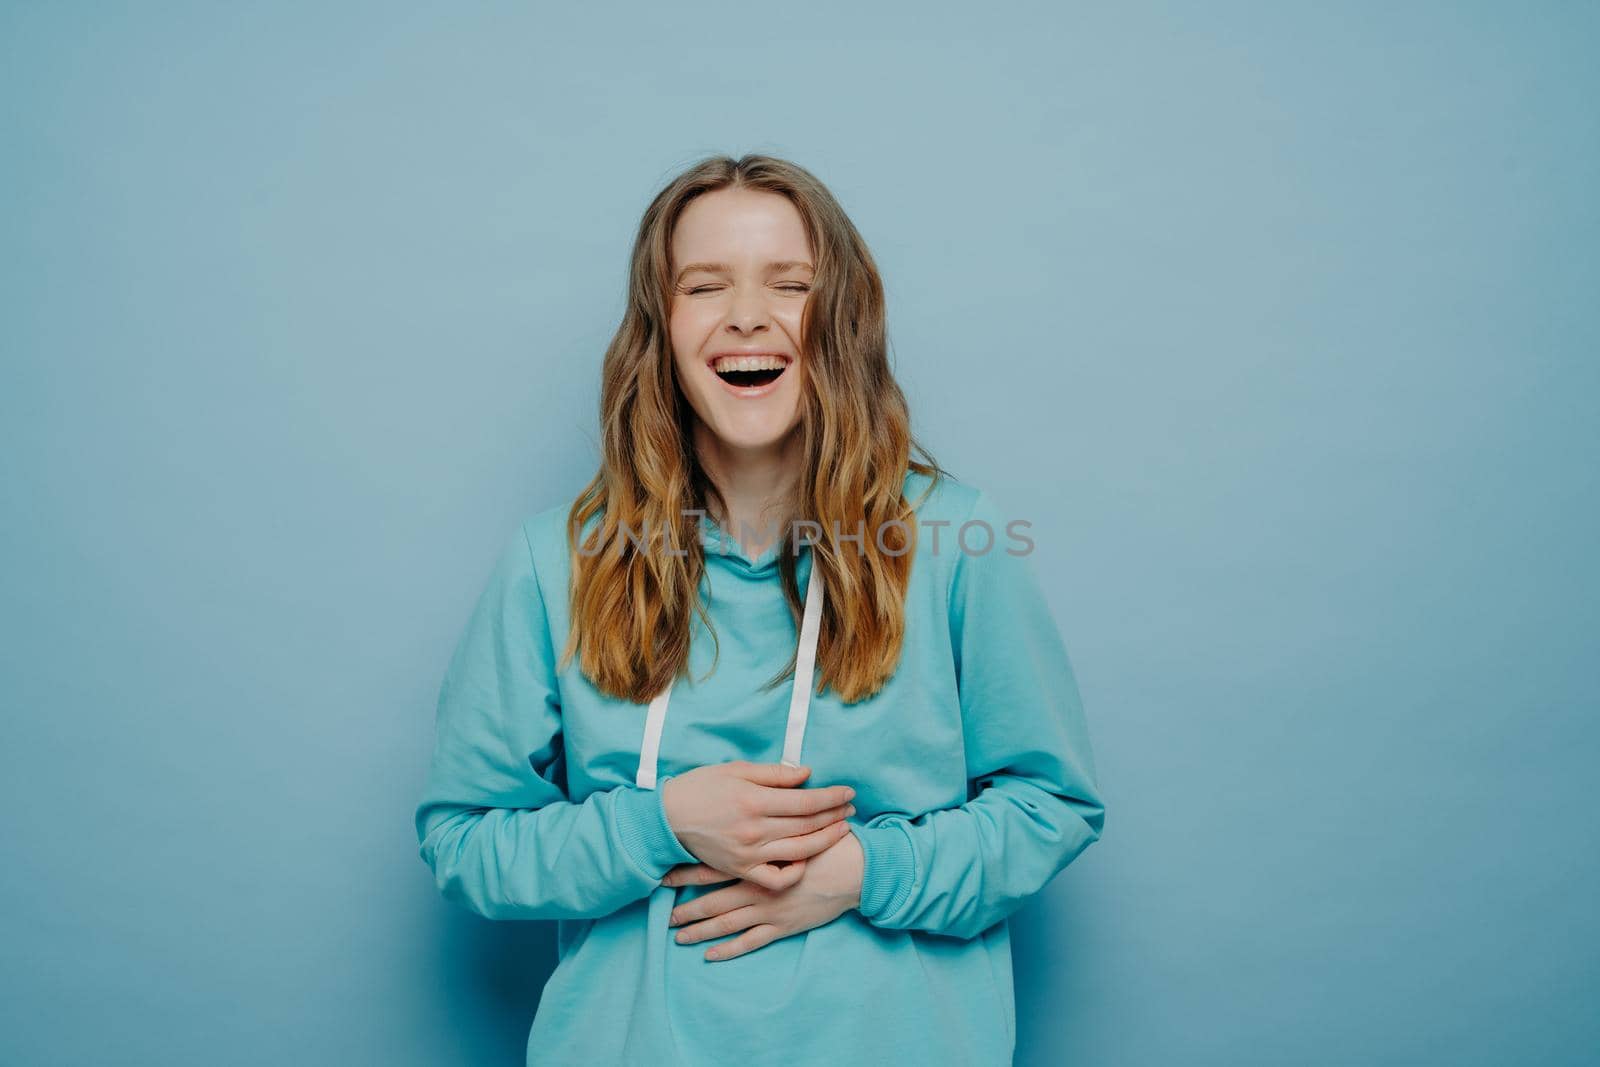 Overjoyed young woman dressed in hoodie holding belly and cant stop laughing after hearing hilarious joke, keeping eyes closed and having fun while standing isolated over blue background, studio shot